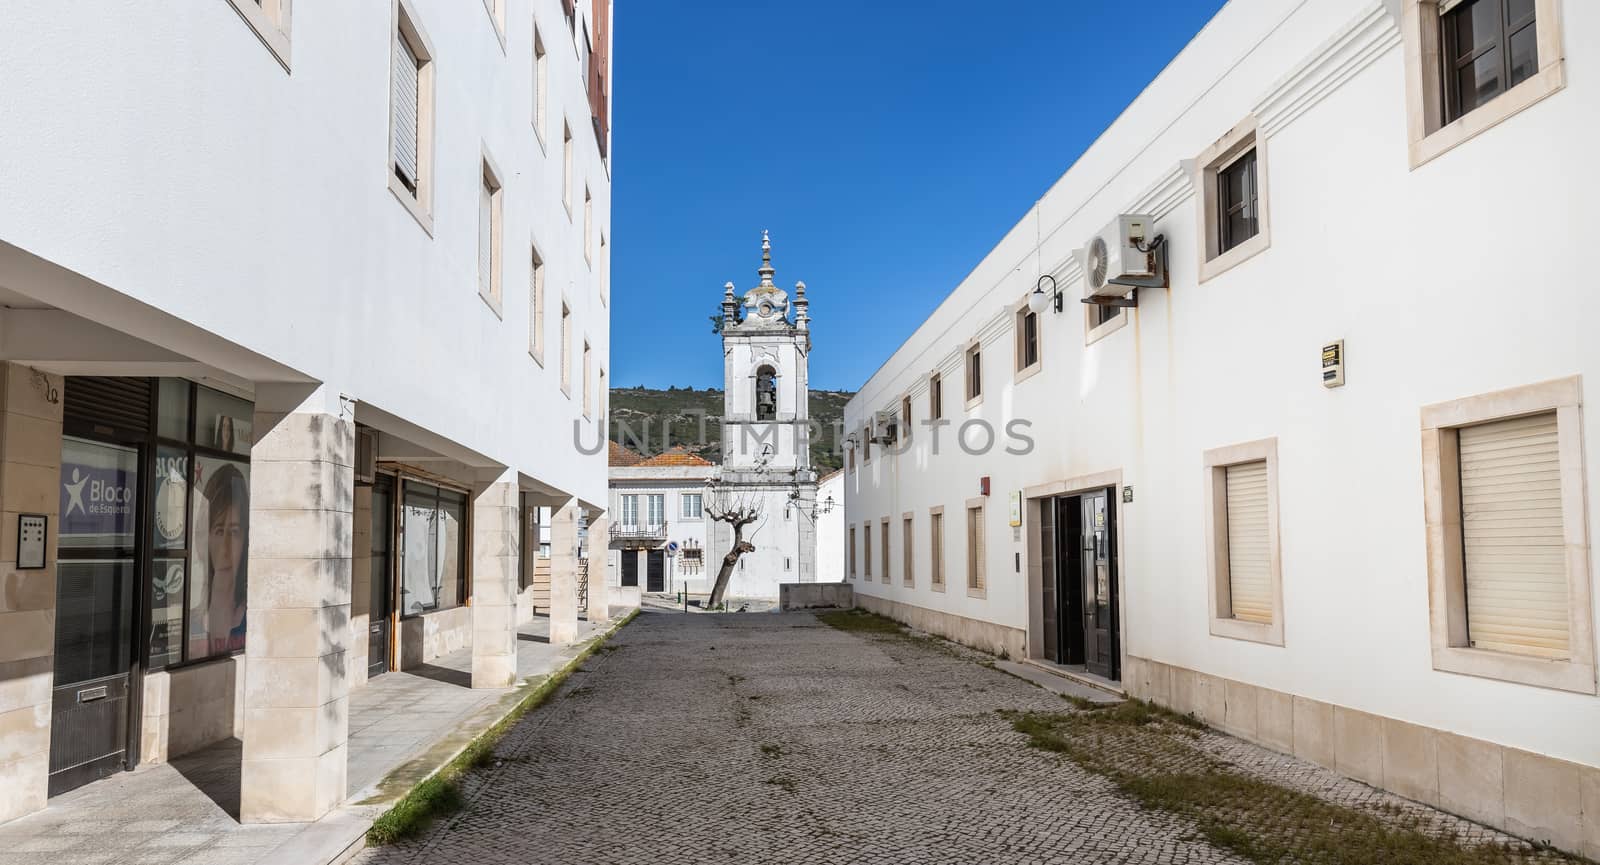 Sesimbra, Portugal - February 19, 2020: Architecture detail of the conservation of civil registers (Conservatoria do Registro Civil) next to the Matriz church of Sesimbra on a winter day